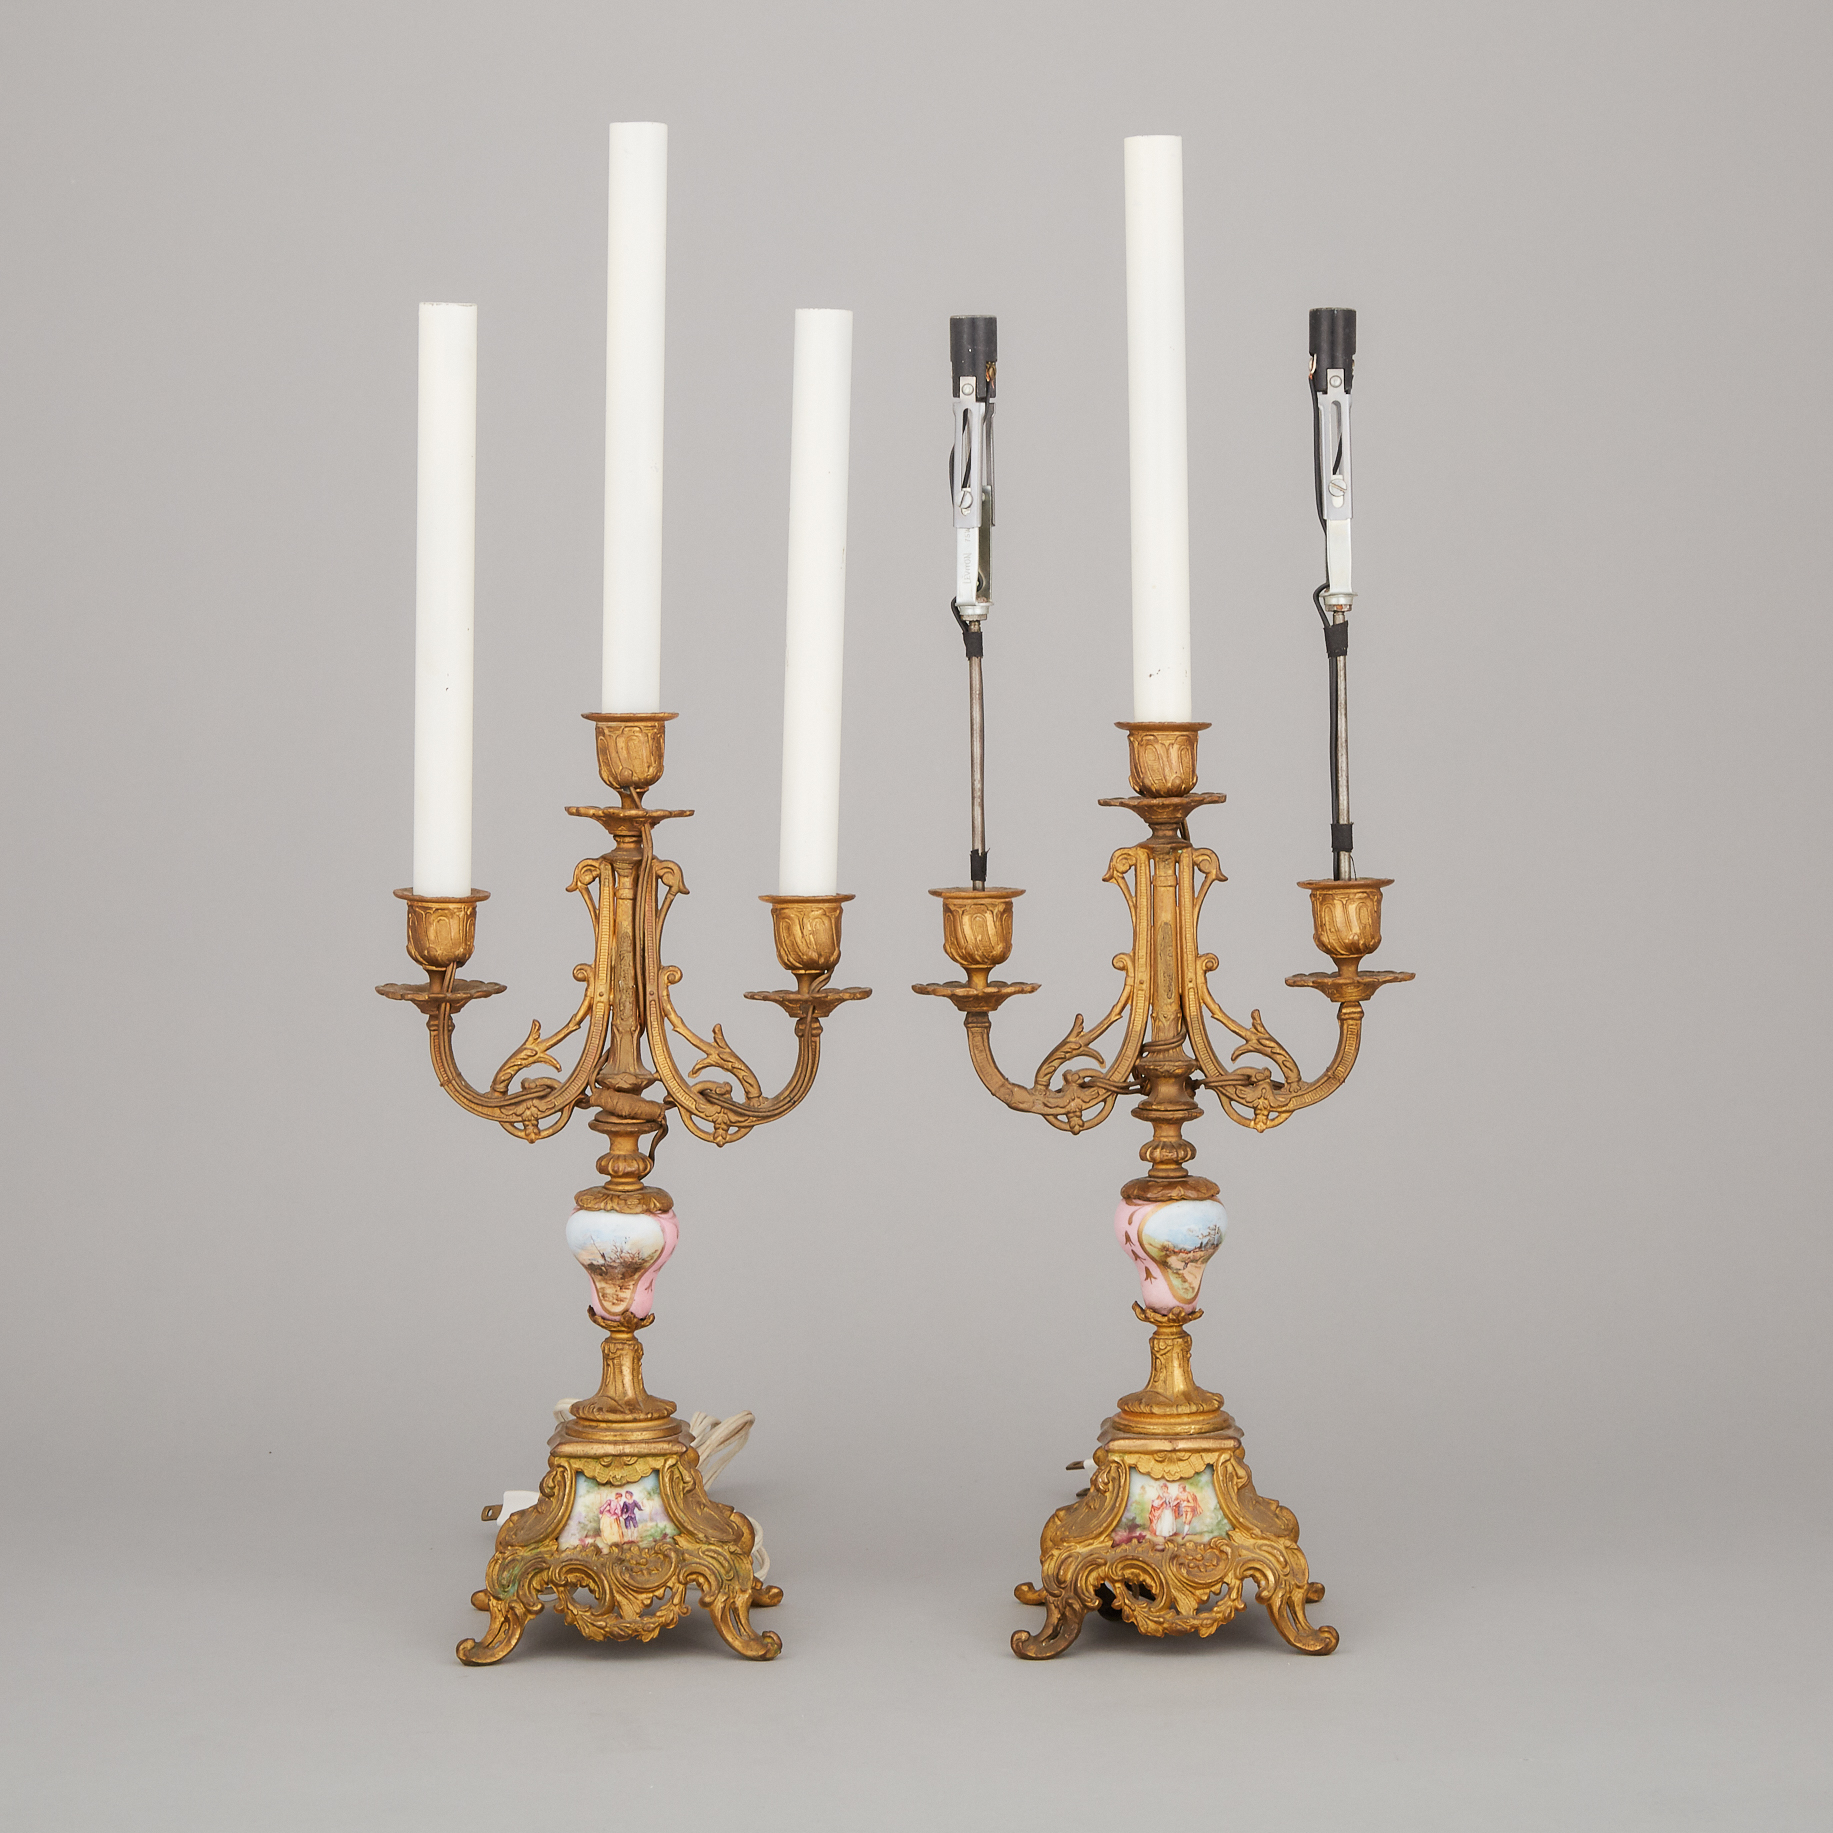 Pair of French Porcelain Mounted Gilt Metal Mantel Candelabra, early 20th century